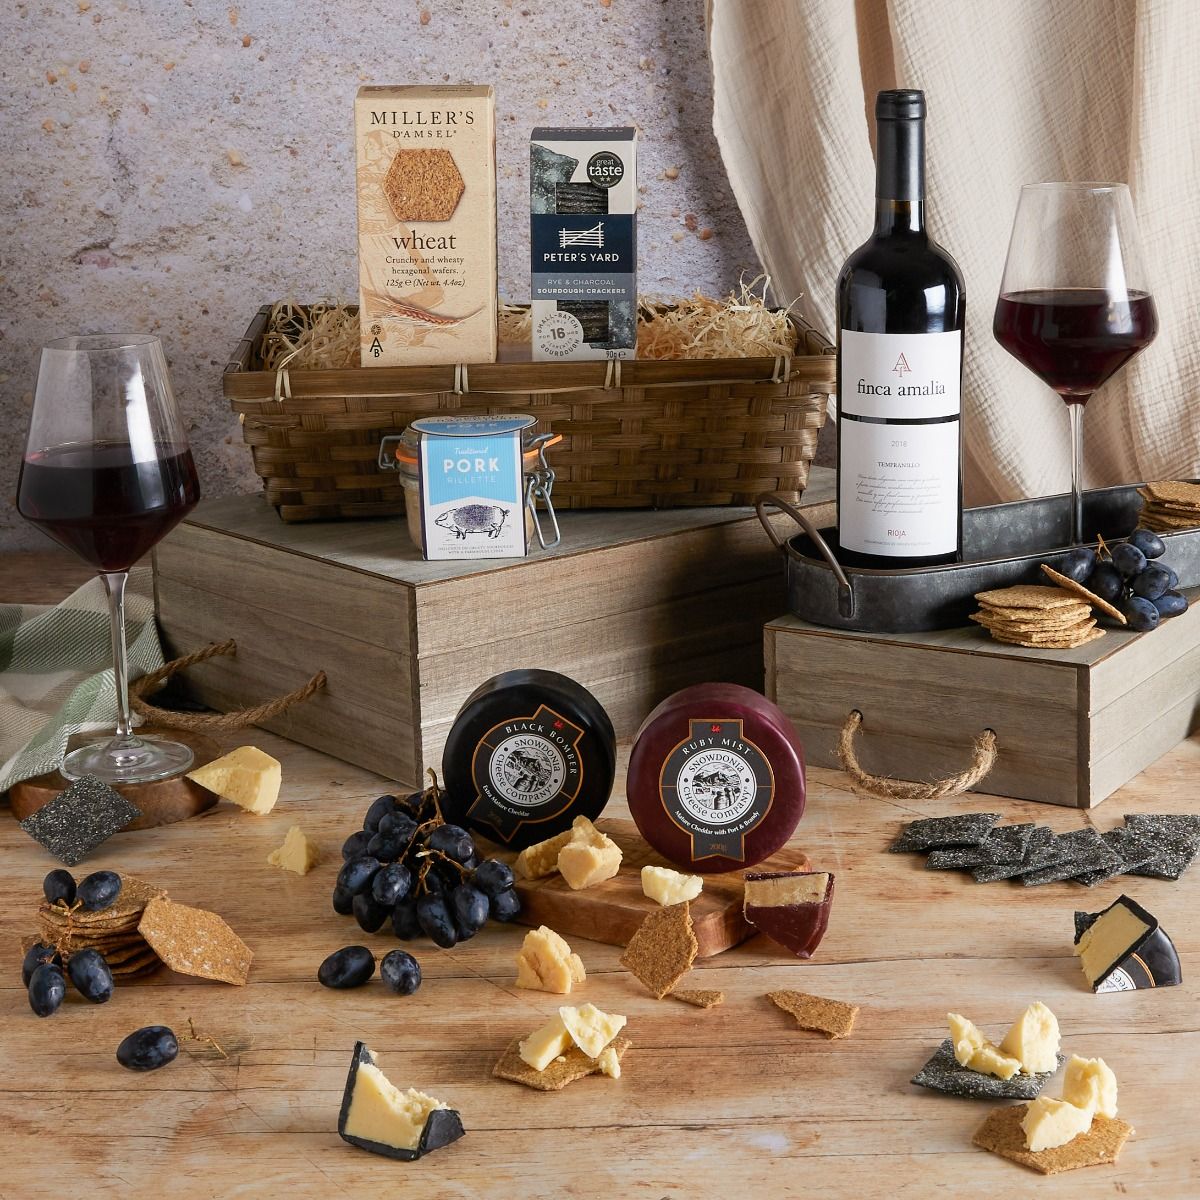 Father's Day Wine, Cheese & Rillette Gift with contents on display